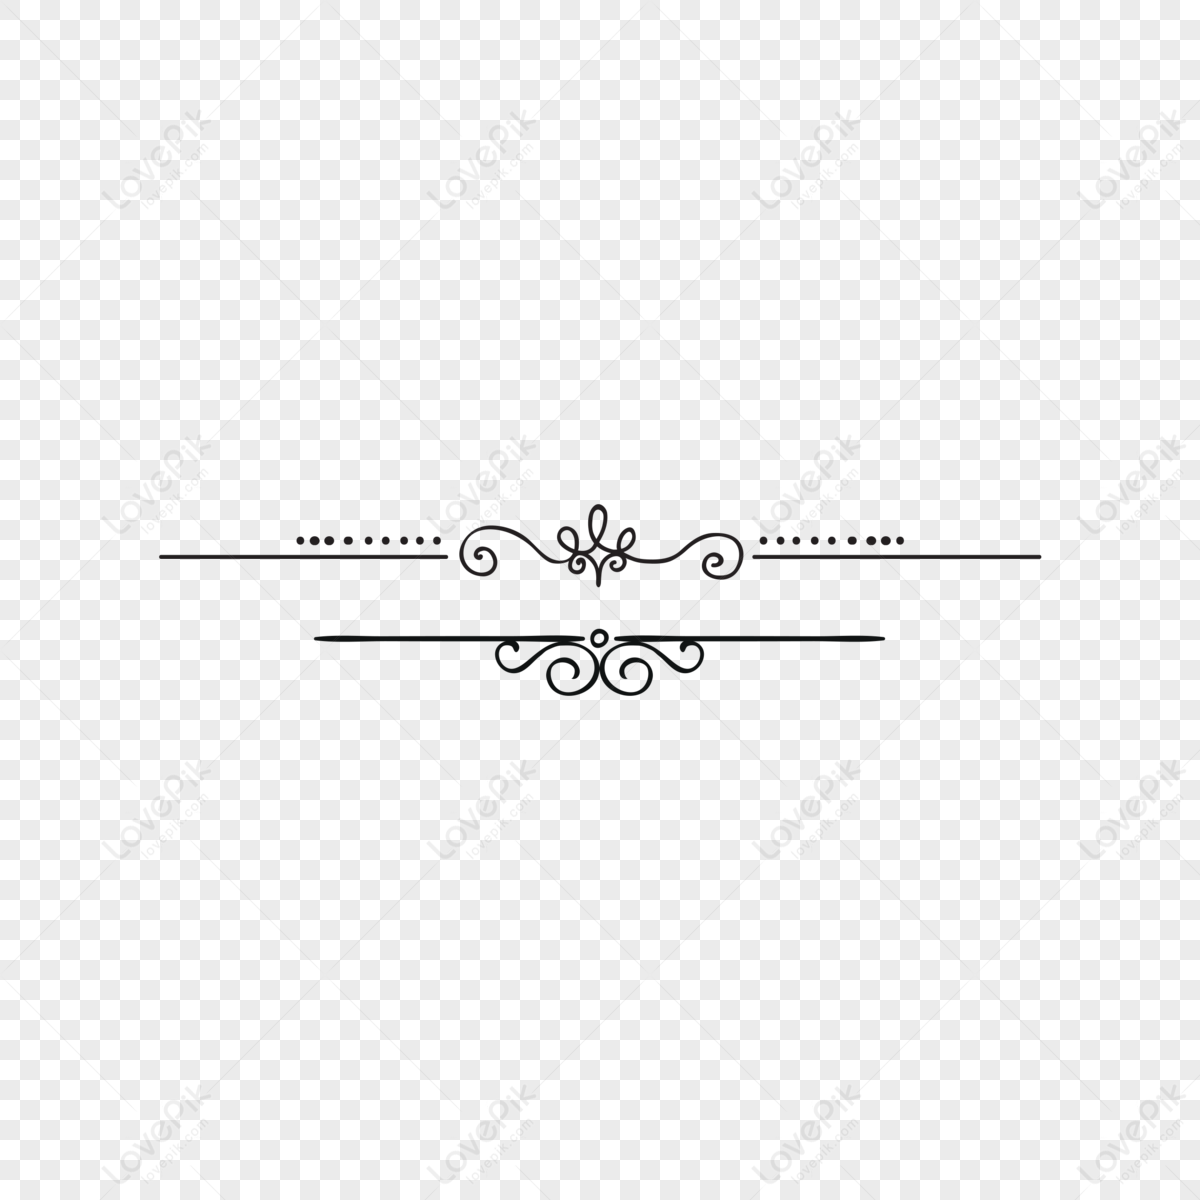 Black Line Drawing Hand Drawn Border Decorative Elements,chinese Style ...